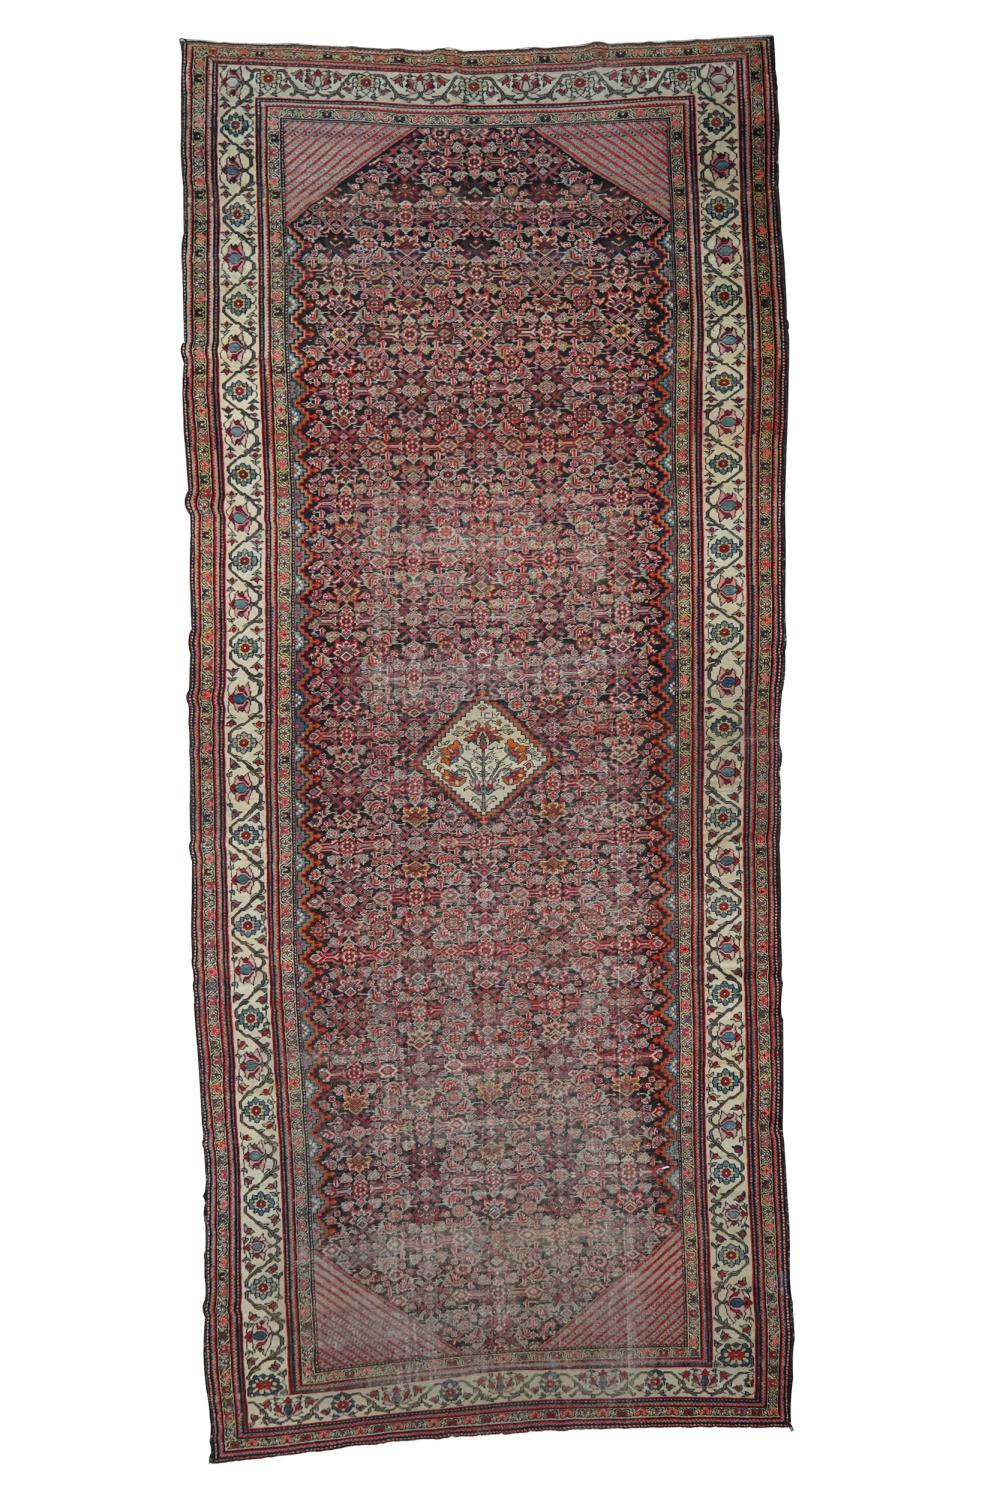 PERSIAN RUNNERred and beige field